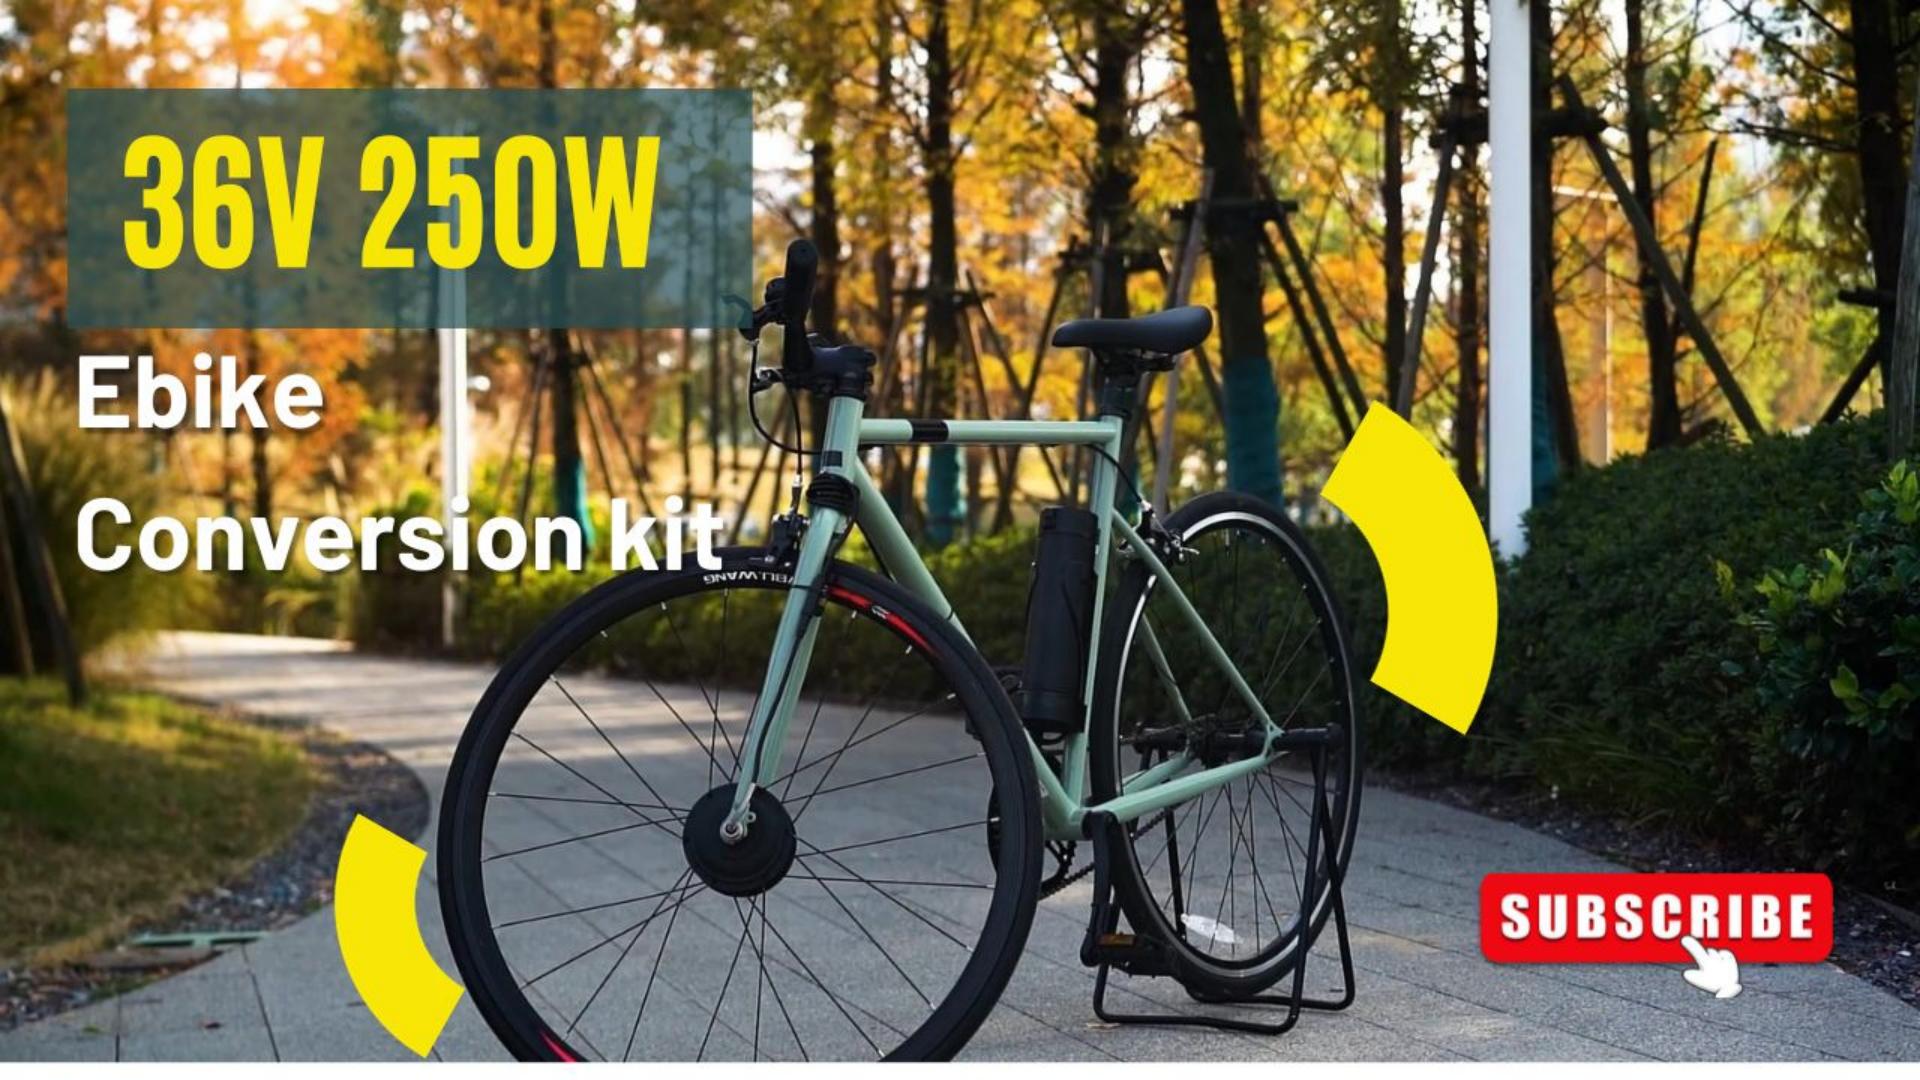 Super Convenient! Electric Bike Kit Makes Your Bicycle an E-bike